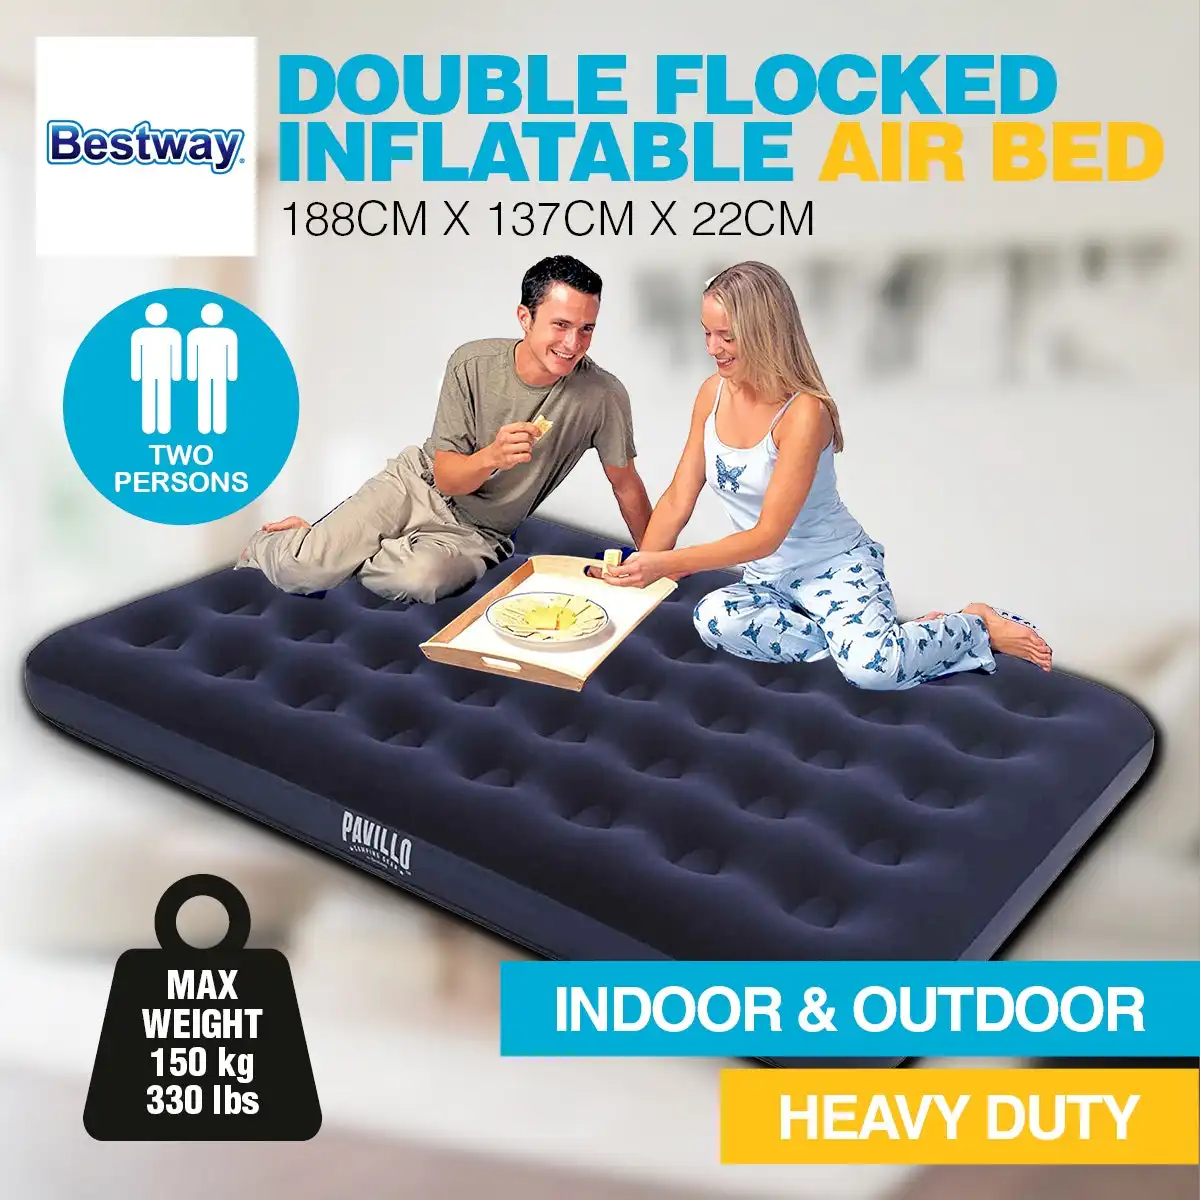 Bestway® Double Inflatable Air Bed Indoor/Outdoor Heavy Duty Durable Camping